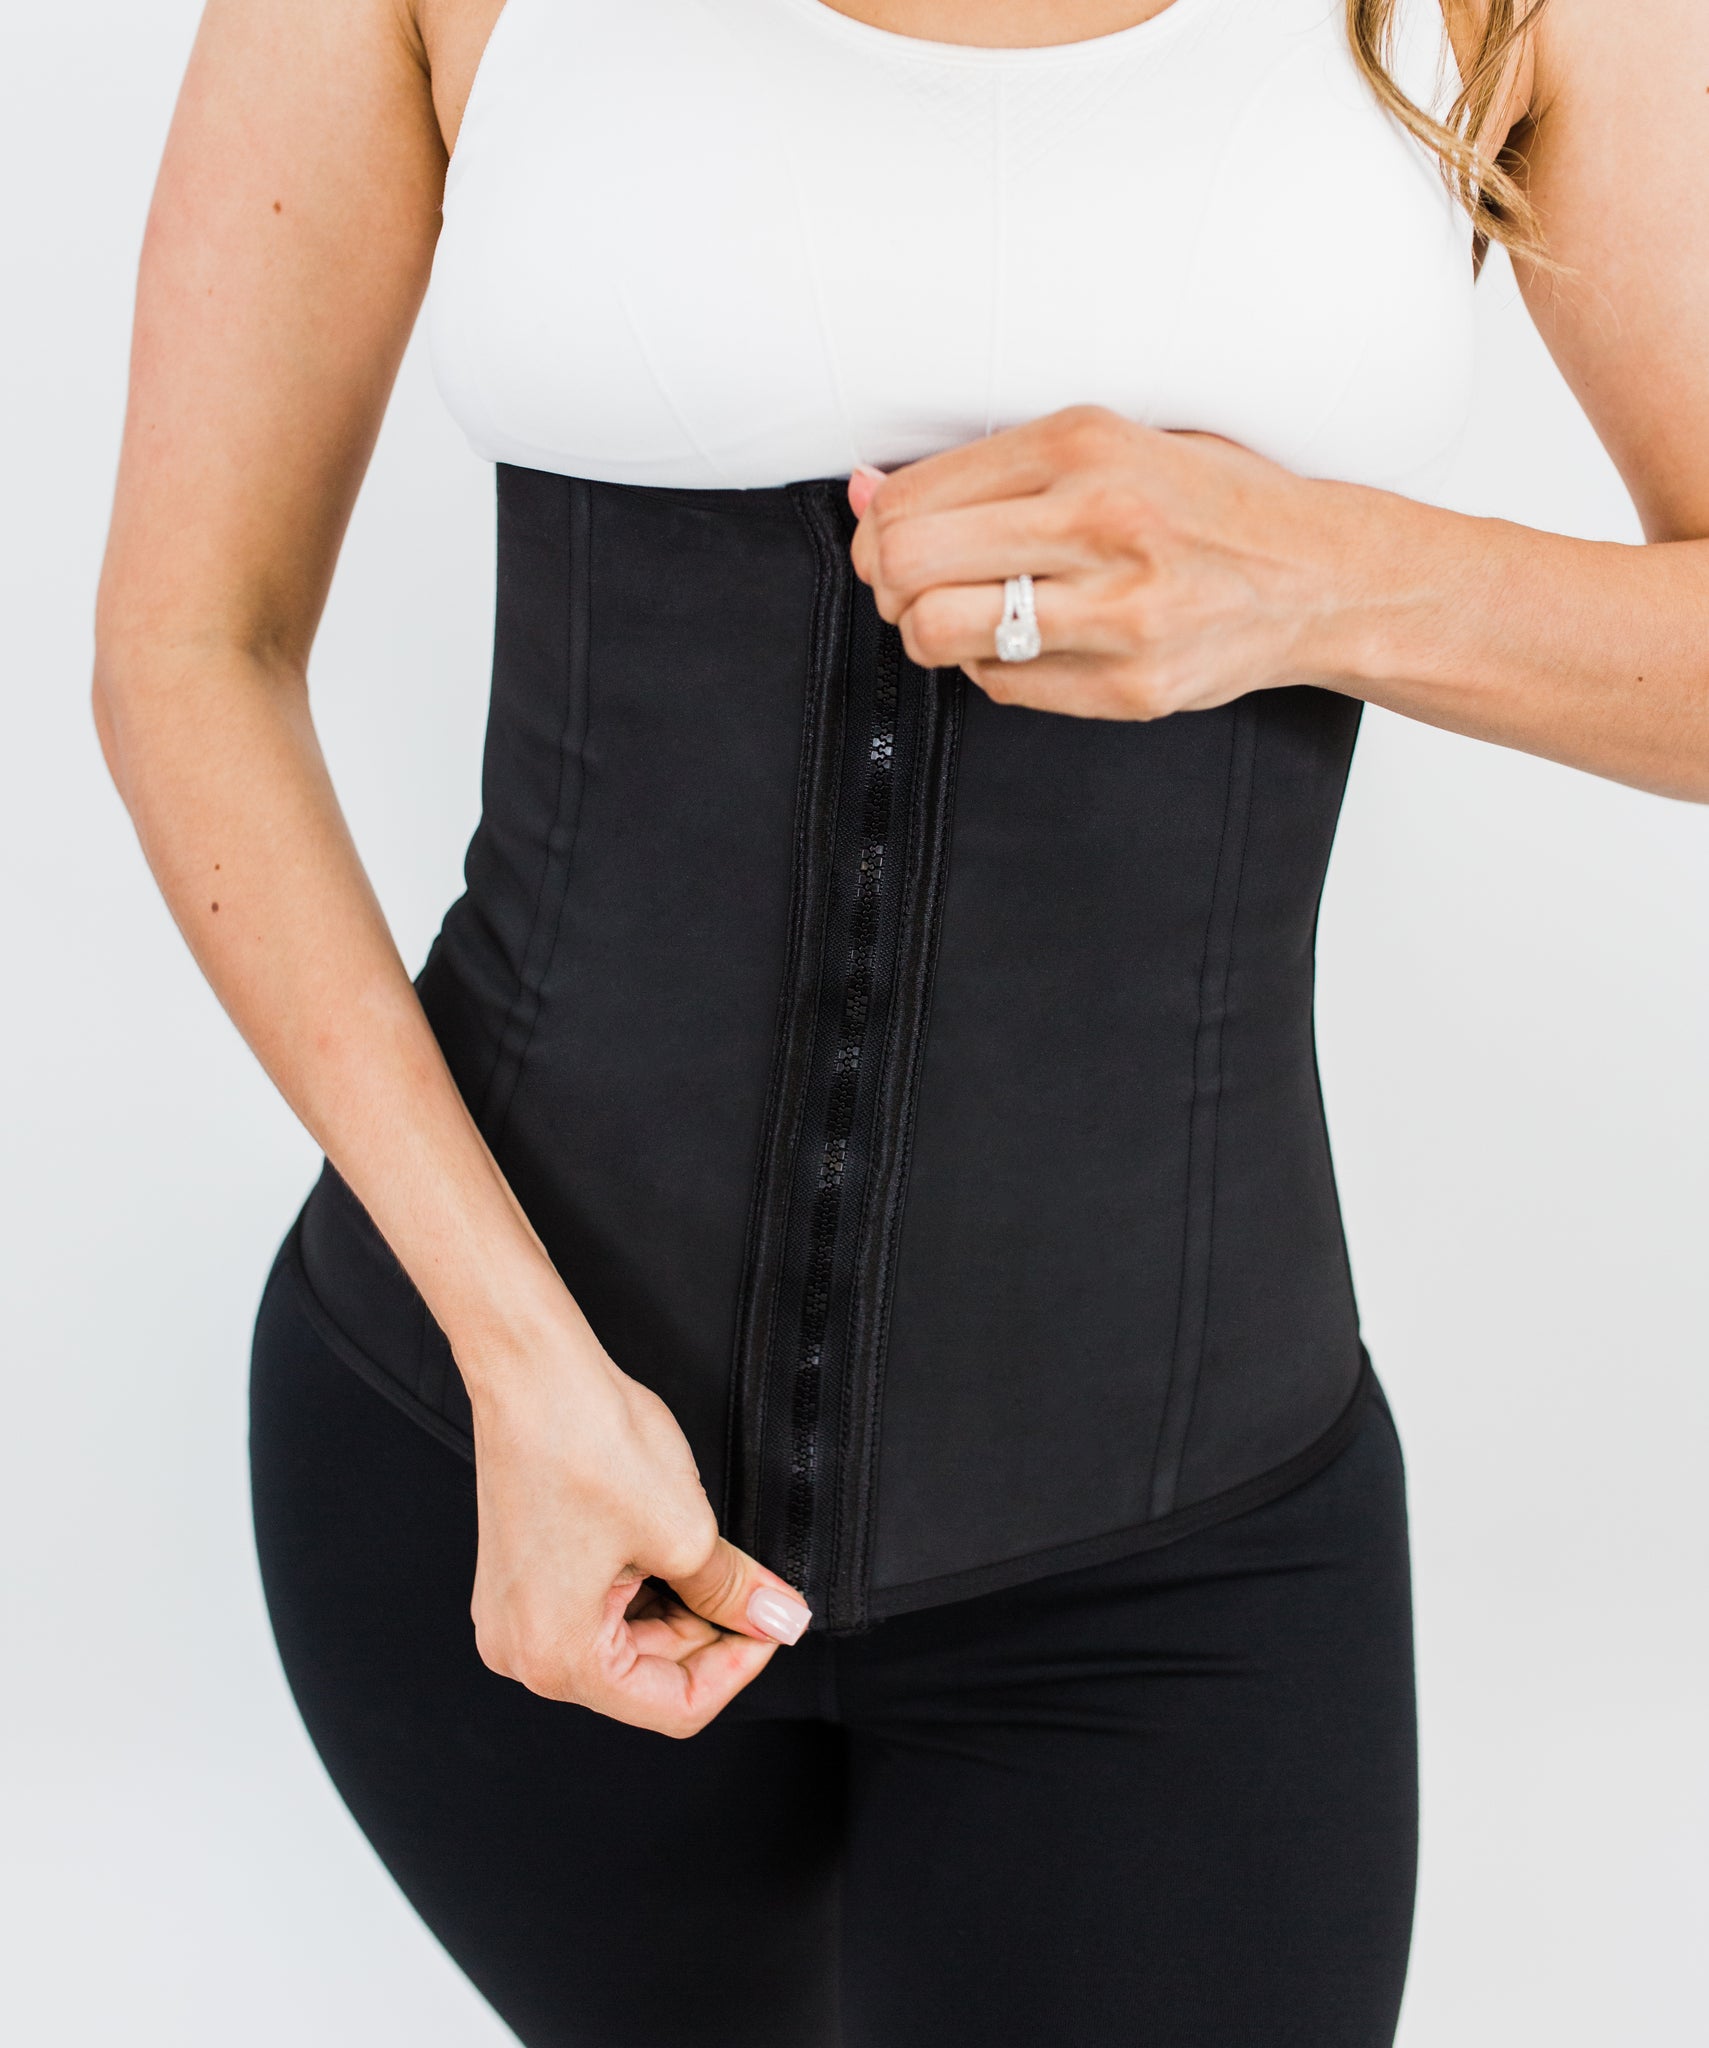 Waist Training Corset with Zipper from the Style Brand